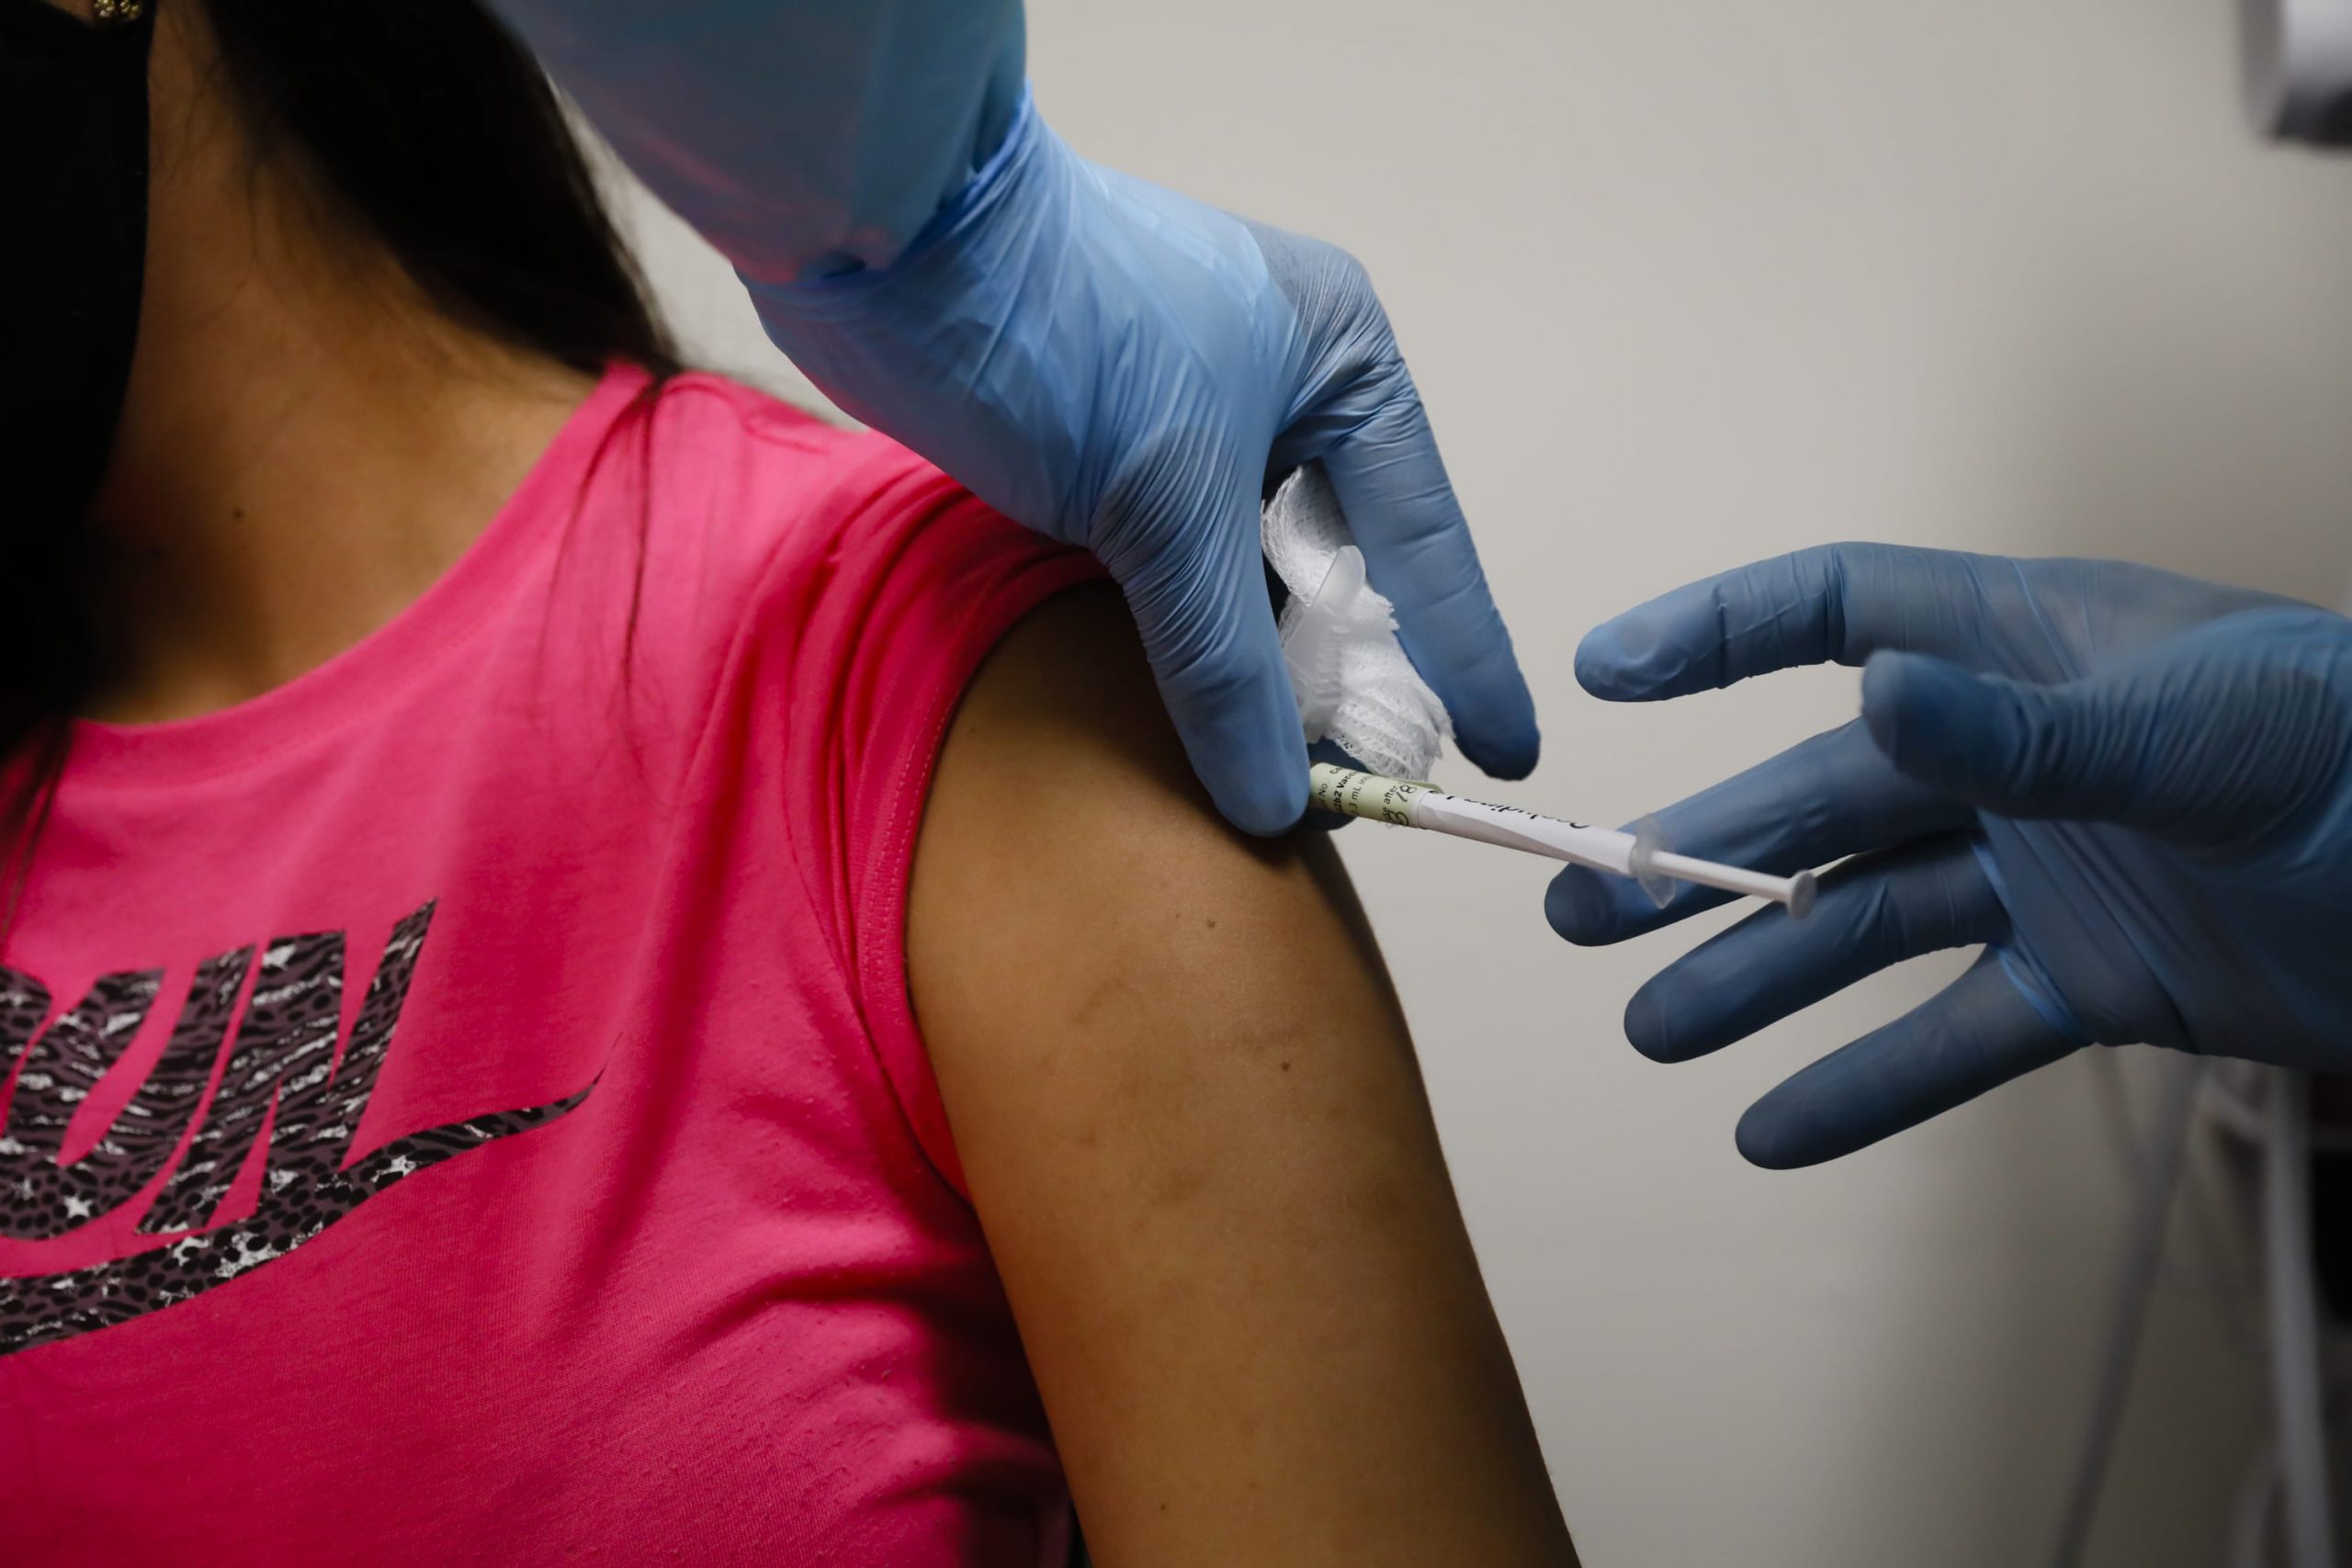 Coronavirus vaccine information from Pfizer unlikely to come back earlier than U.S. election